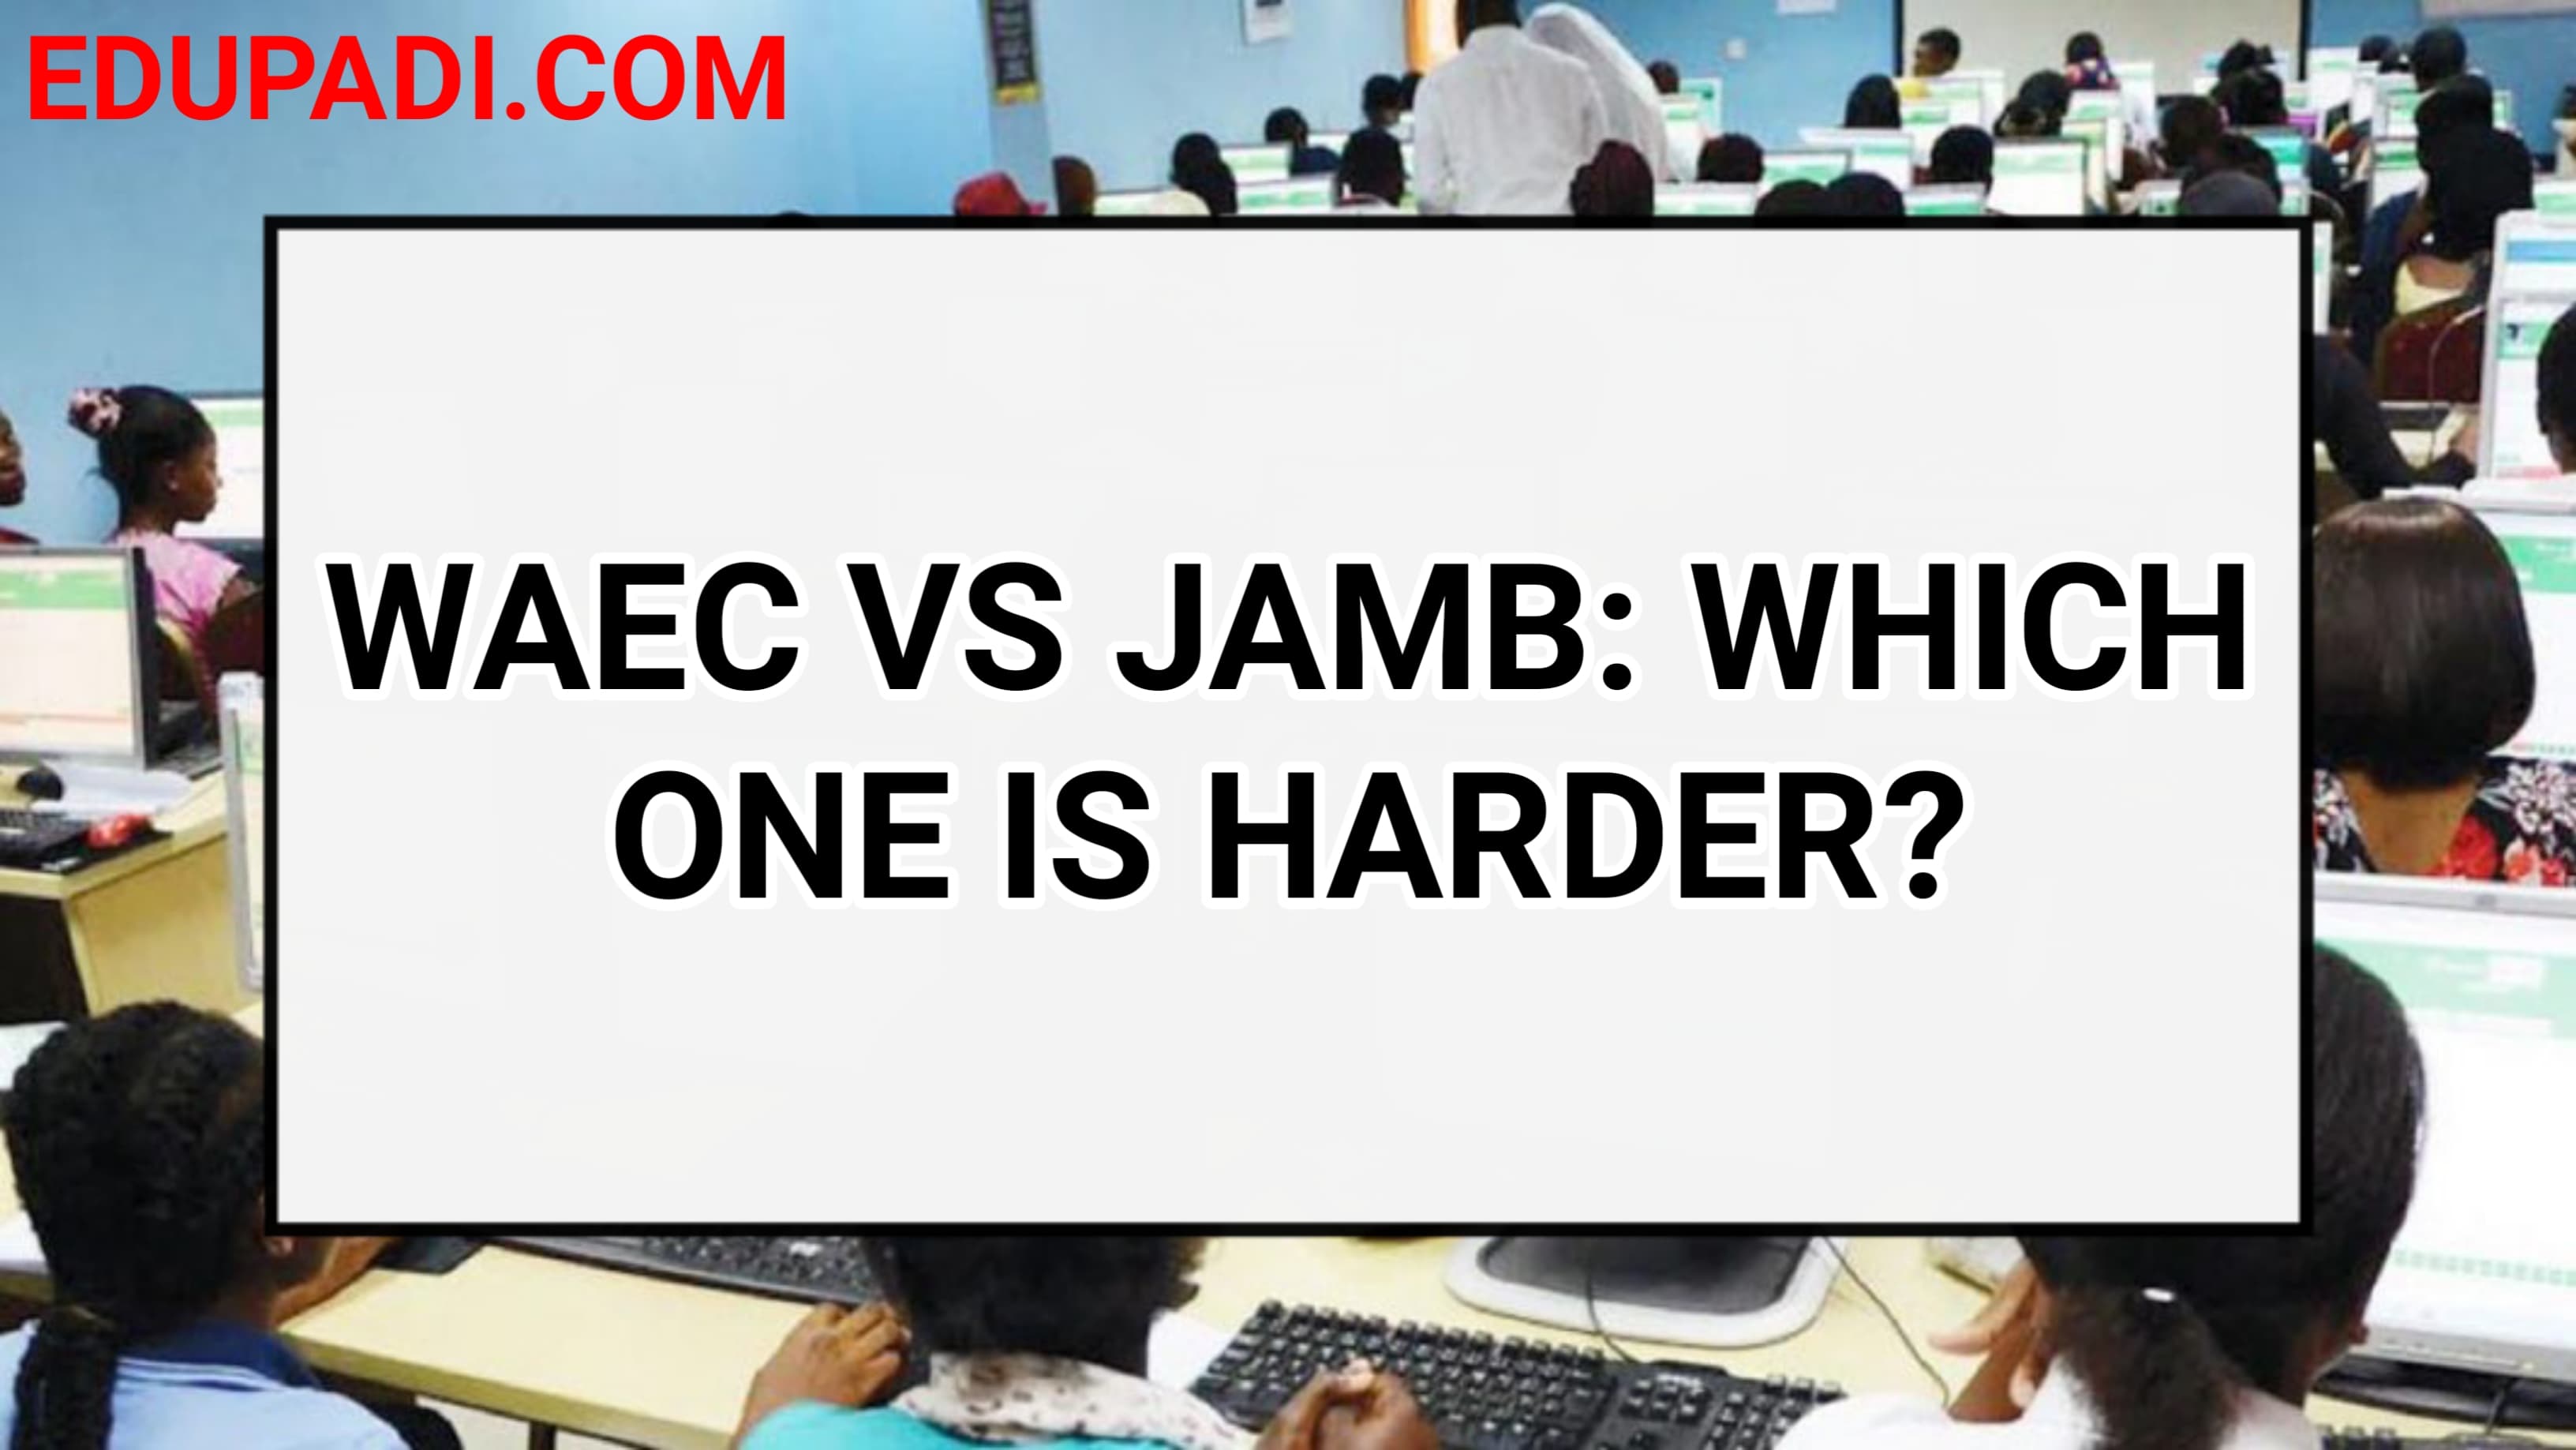 Cover Image for WAEC And JAMB: Which One Is Harder? Find Out!